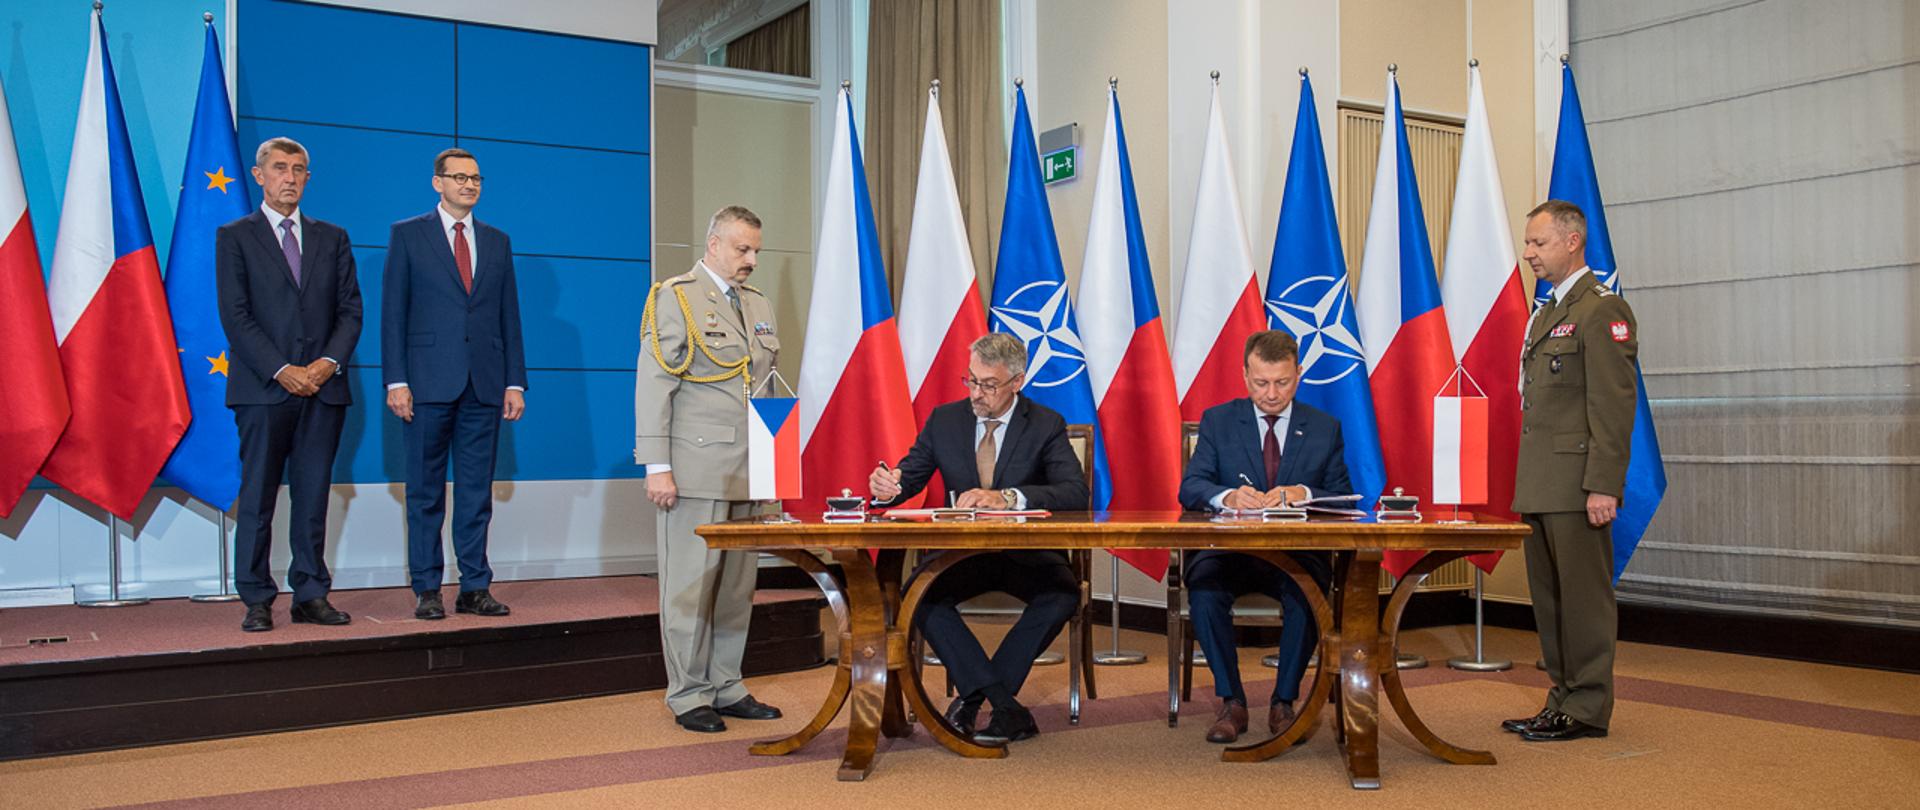 Defence Minister M. Blaszczak signs an agreement with the Czech Defence Minister on military aviation cooperation